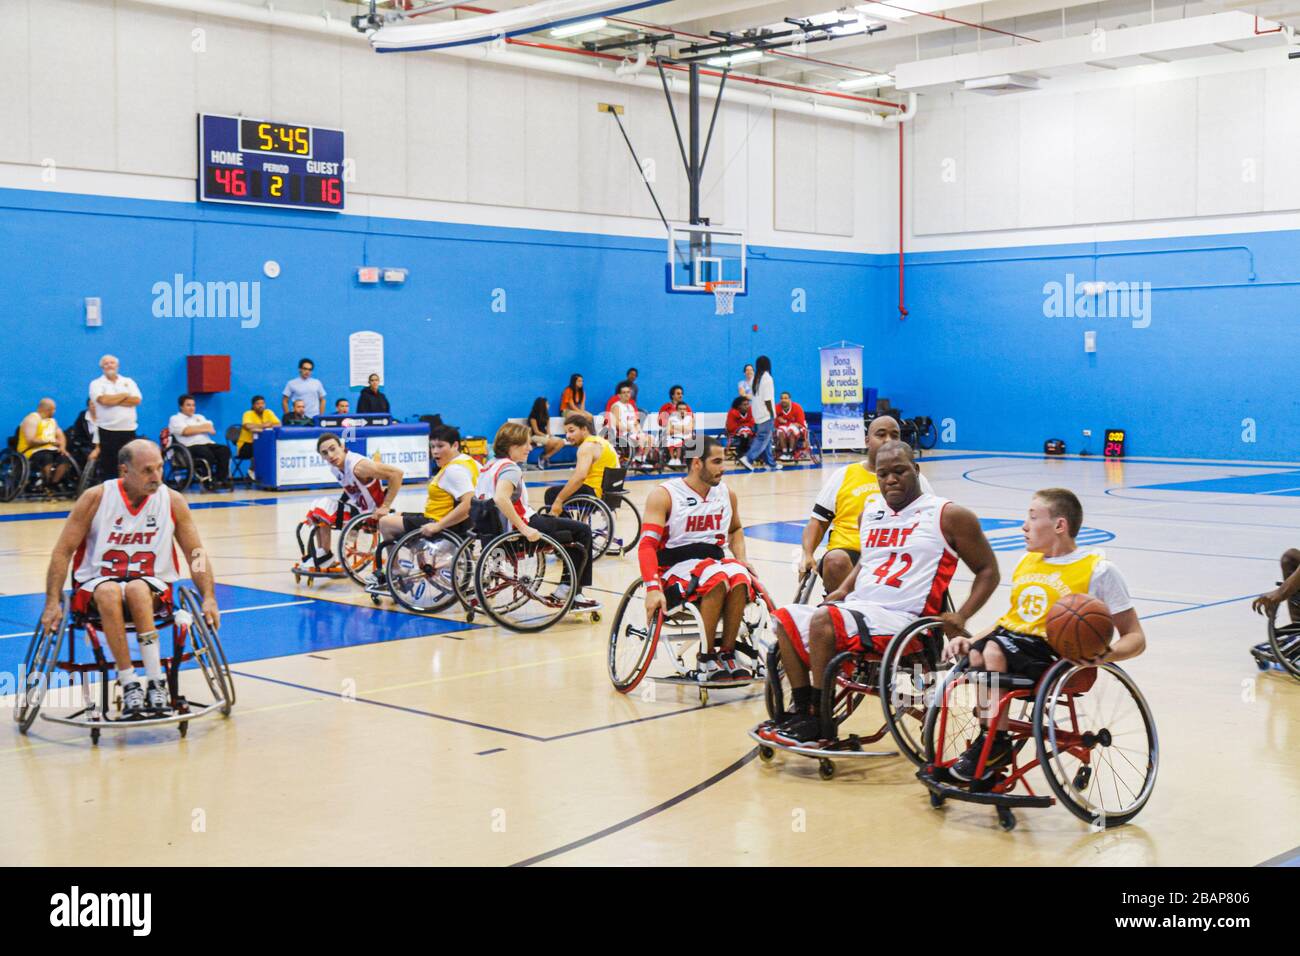 Florida Ability Explosion Colusana Foundation Wheelchair Basketball man men male adult adults,teen teens teenager teenagers boy boys youth youths,disa Stock Photo